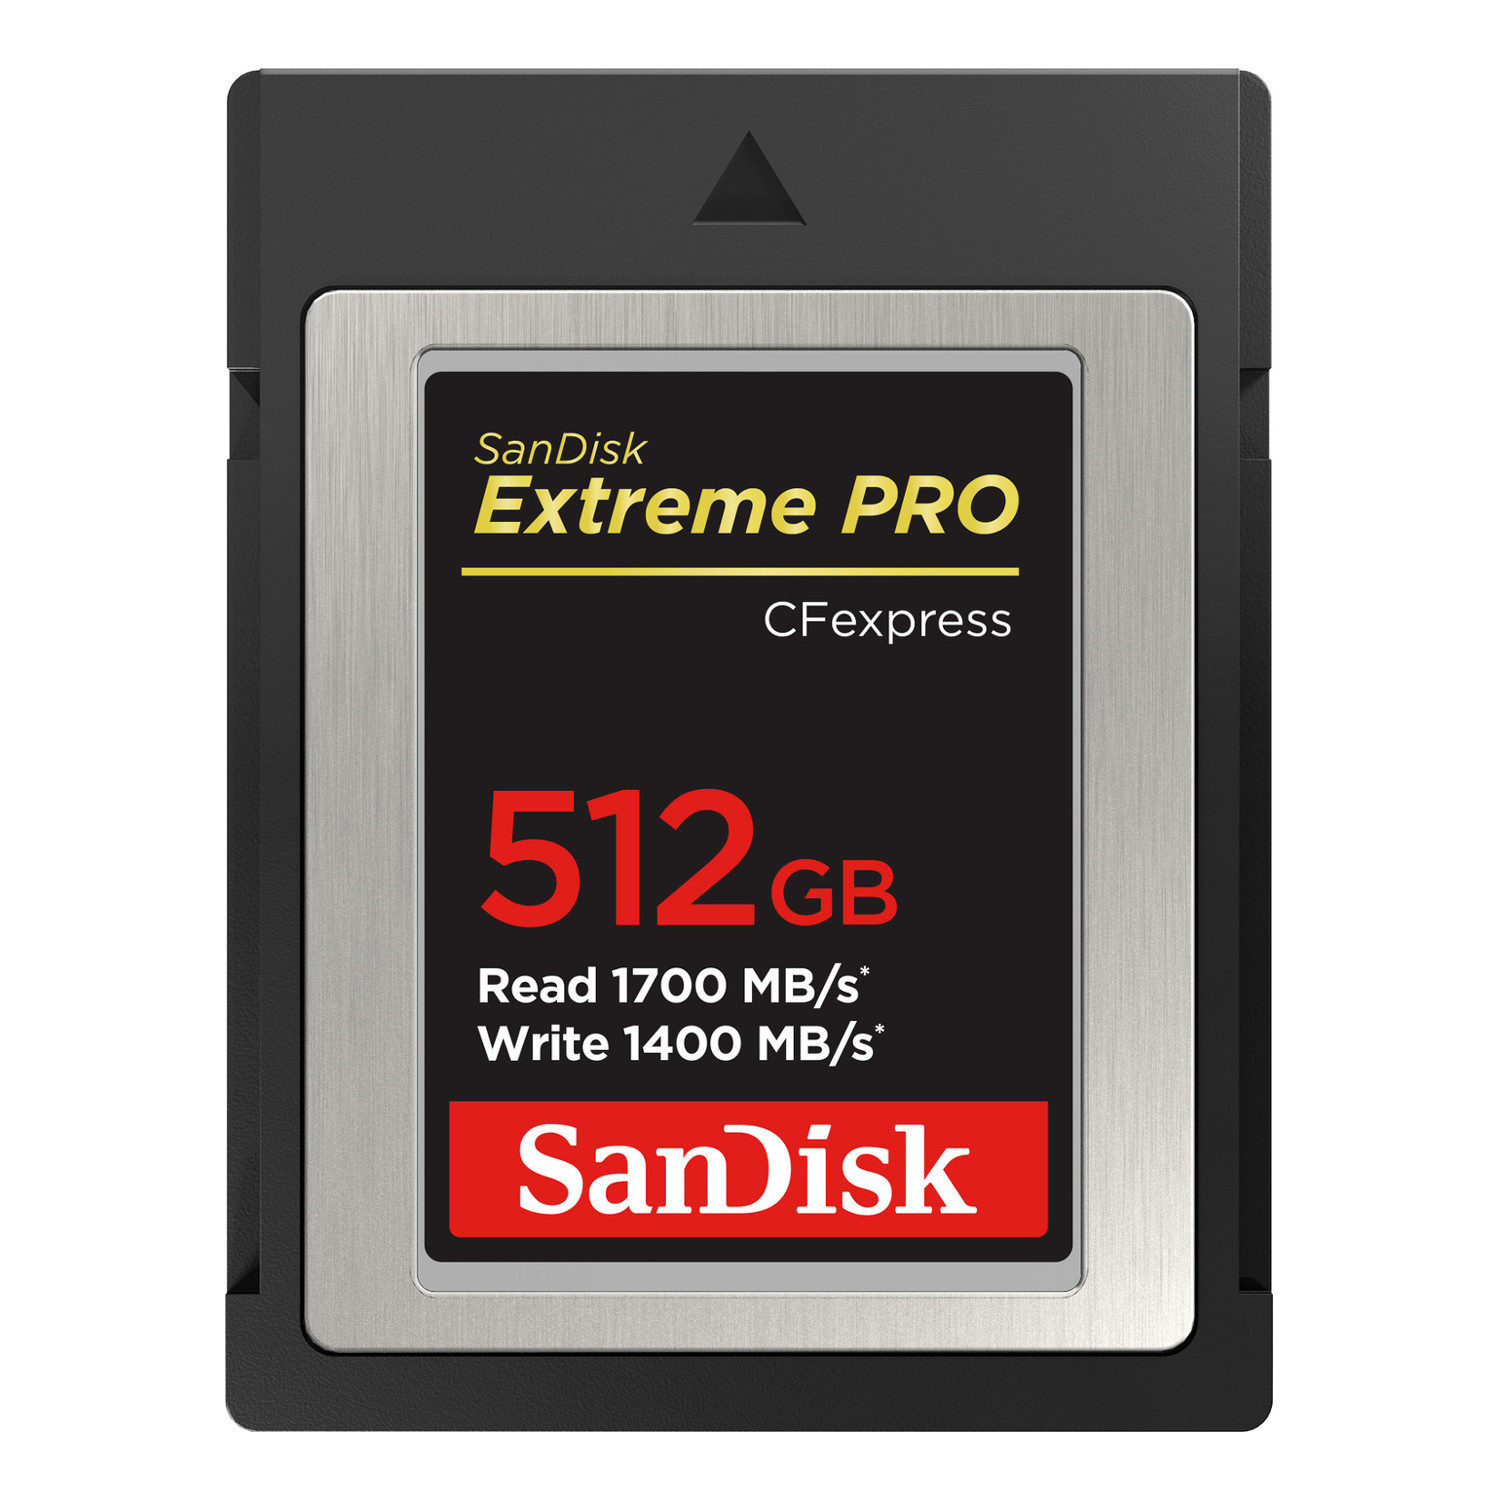 SanDisk 512GB CFexpress Type B Extreme Pro 1700MB/s geheugenkaart